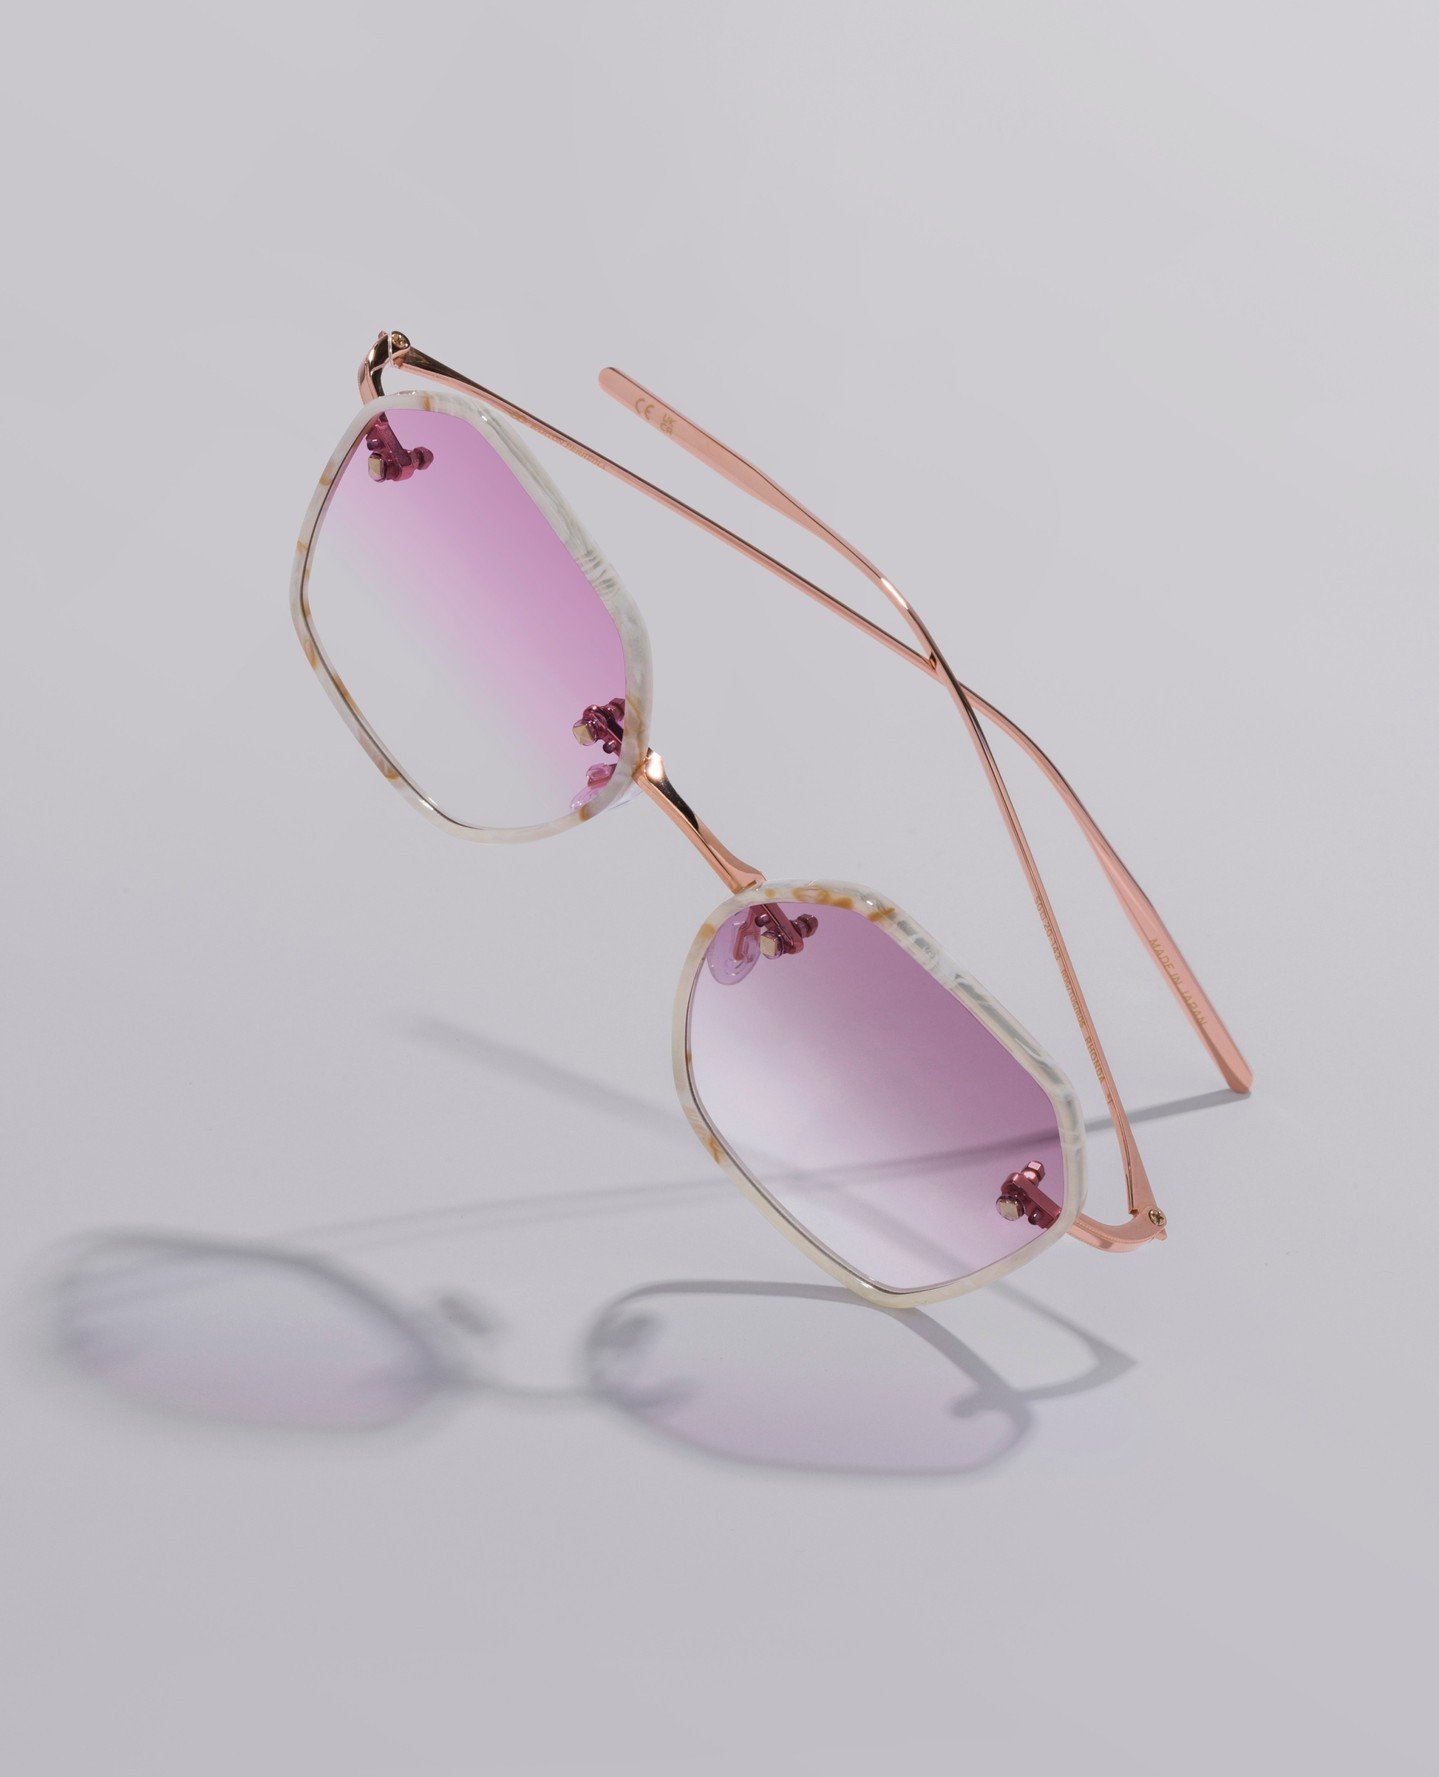 Stunning acetate details paired perfectly with beautiful jewel-toned lenses.⁠
⁠
⁠
#BartonPerreira ⁠
#Sunglasses ⁠
#SS24⁠
#TheRhonda